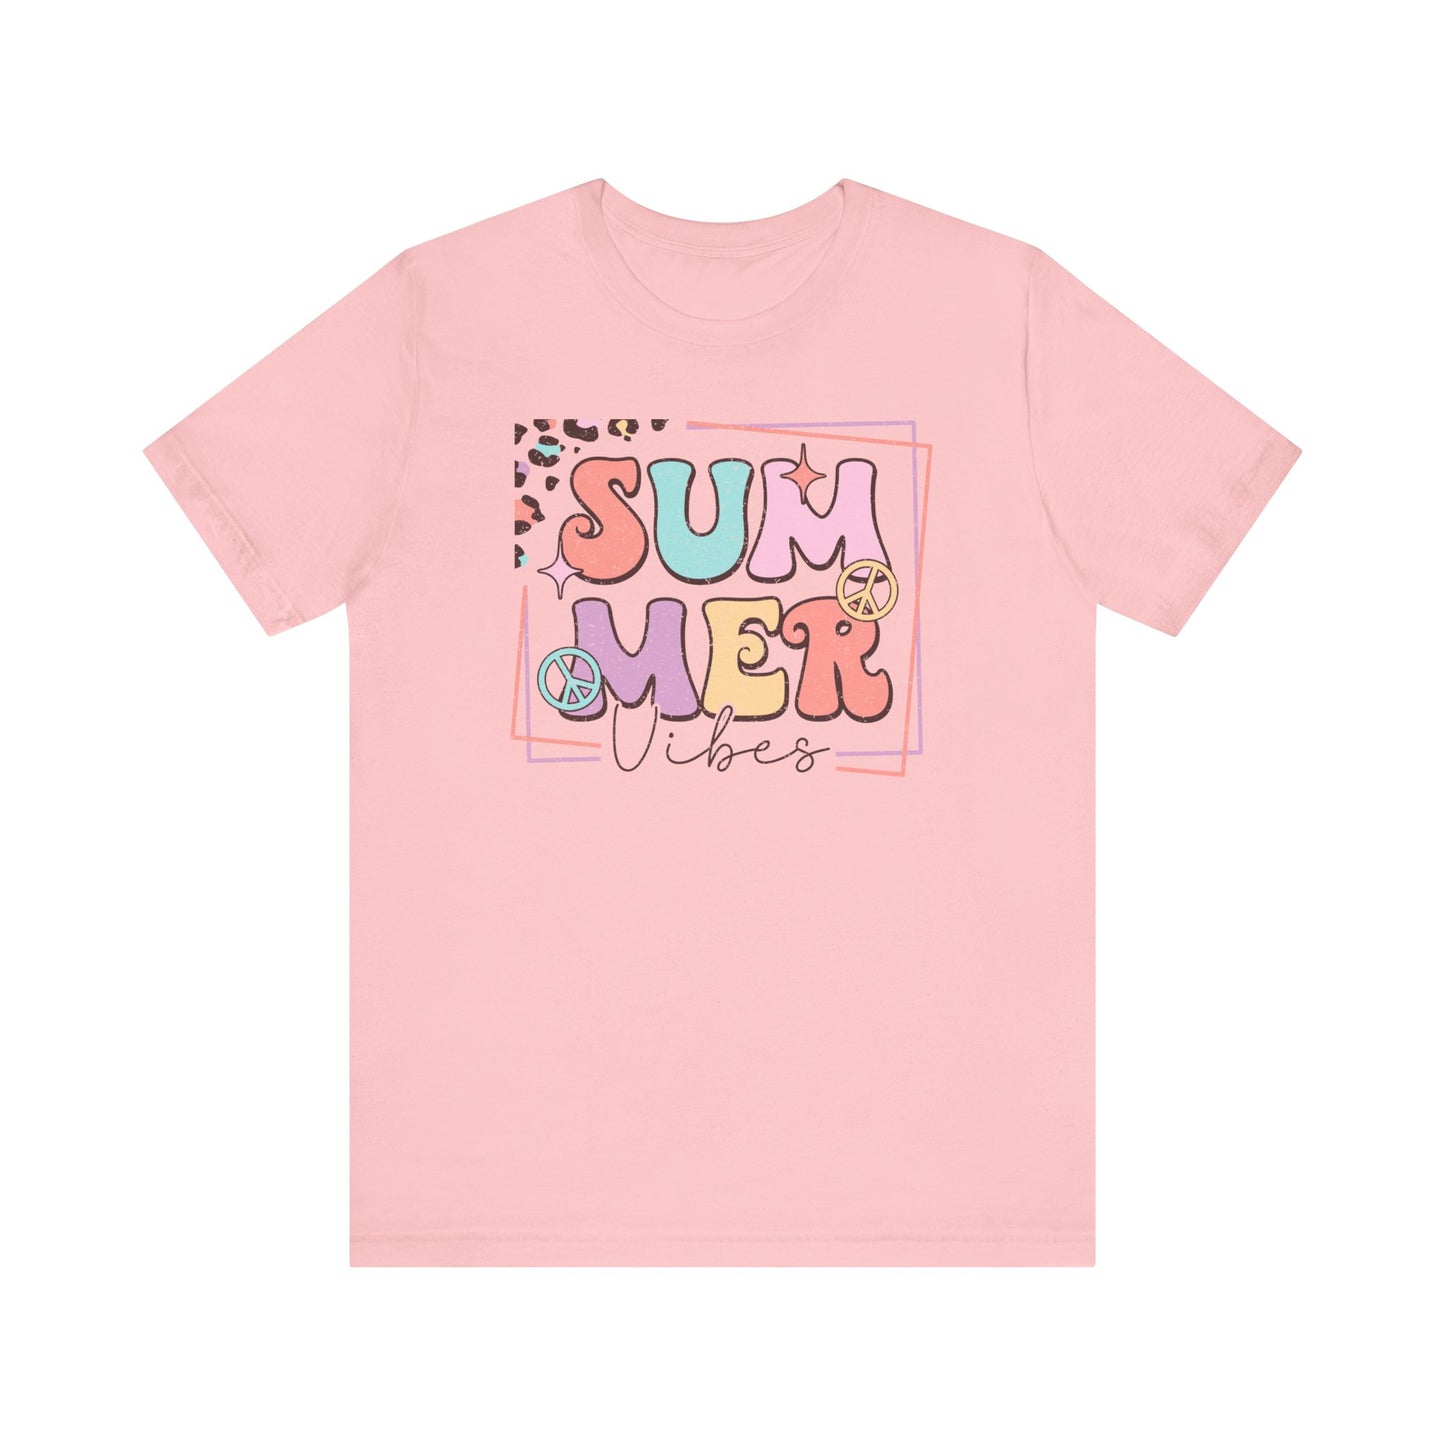 Colorful Summer Vibes T-Shirt, Trendy Beach Style Top, Casual Vacation Tee, Graphic Tee for Women and Men